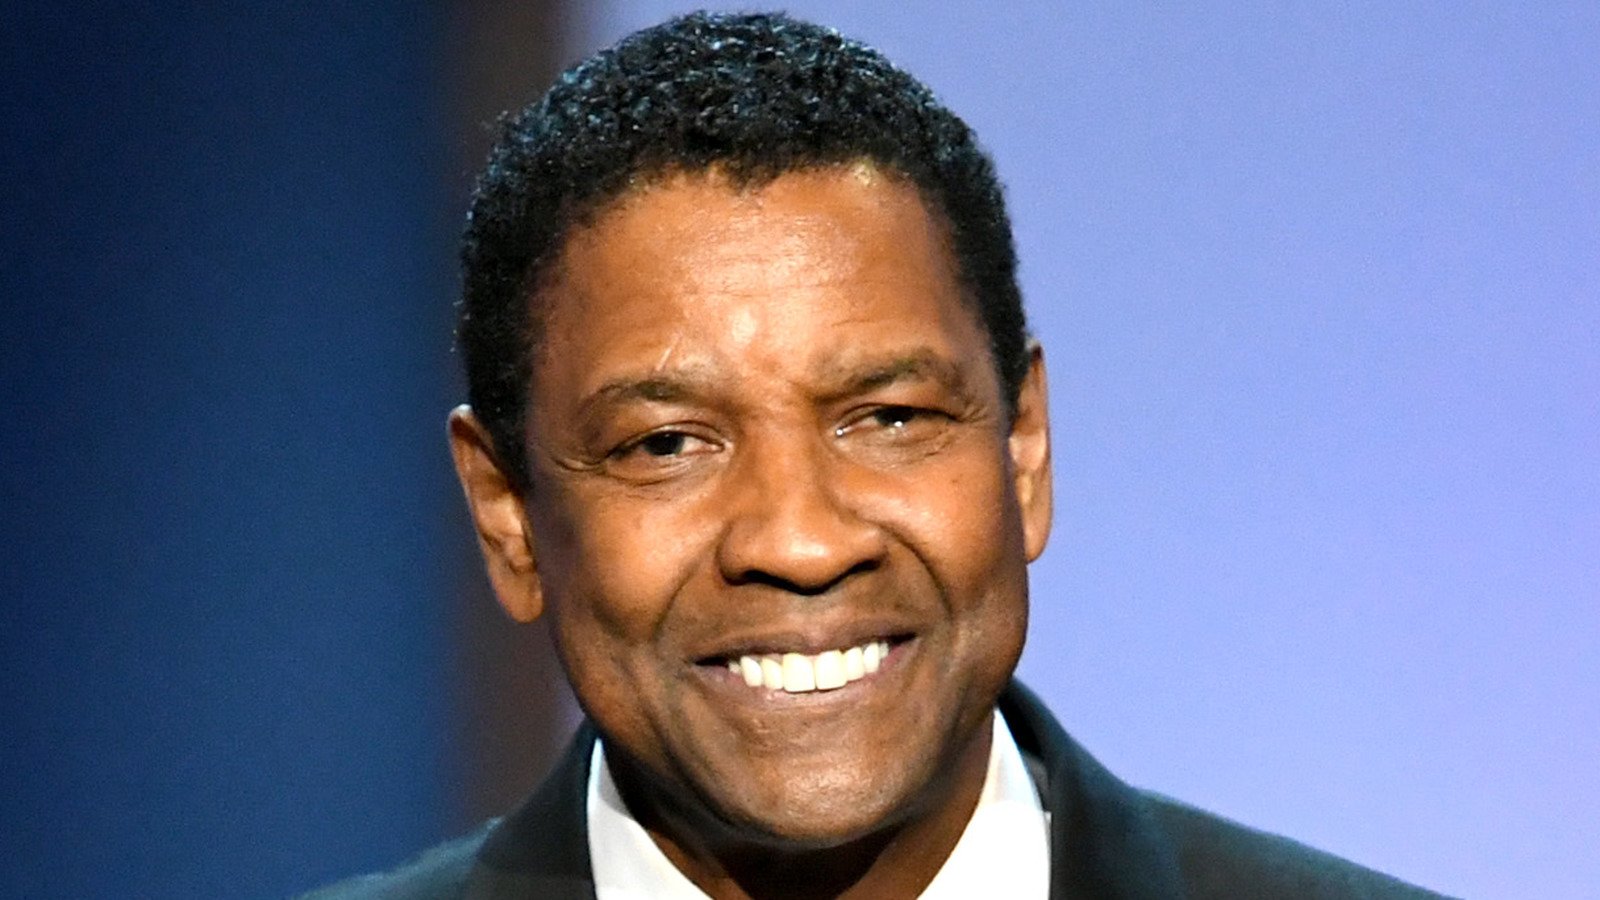 The Controversy Over Denzel Washington's New Film Is Growing - Nicki Swift